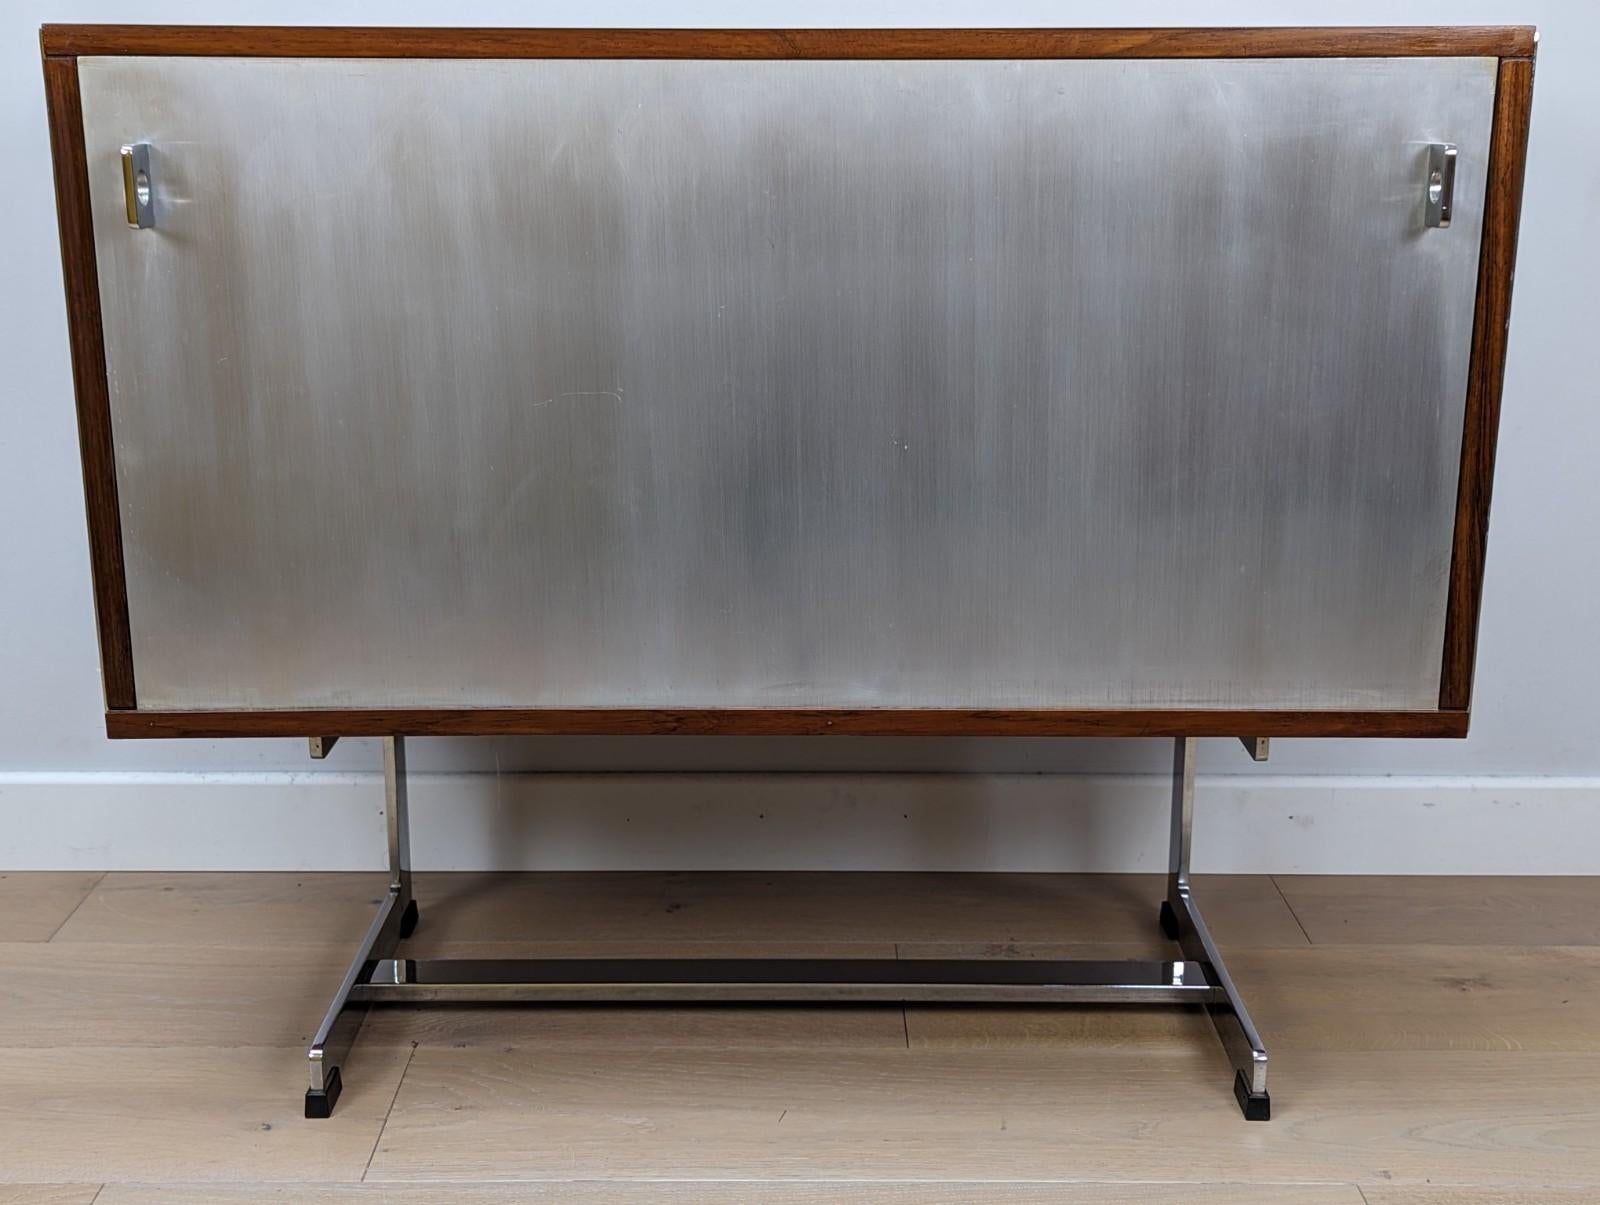 A stunning compact and extremely rare Merrow Associates sideboard / credenza.

The credenza is made out of Brazilian rosewood that has been professionally French polished. It has a drop down front that has a brushed aluminium front.

The unit